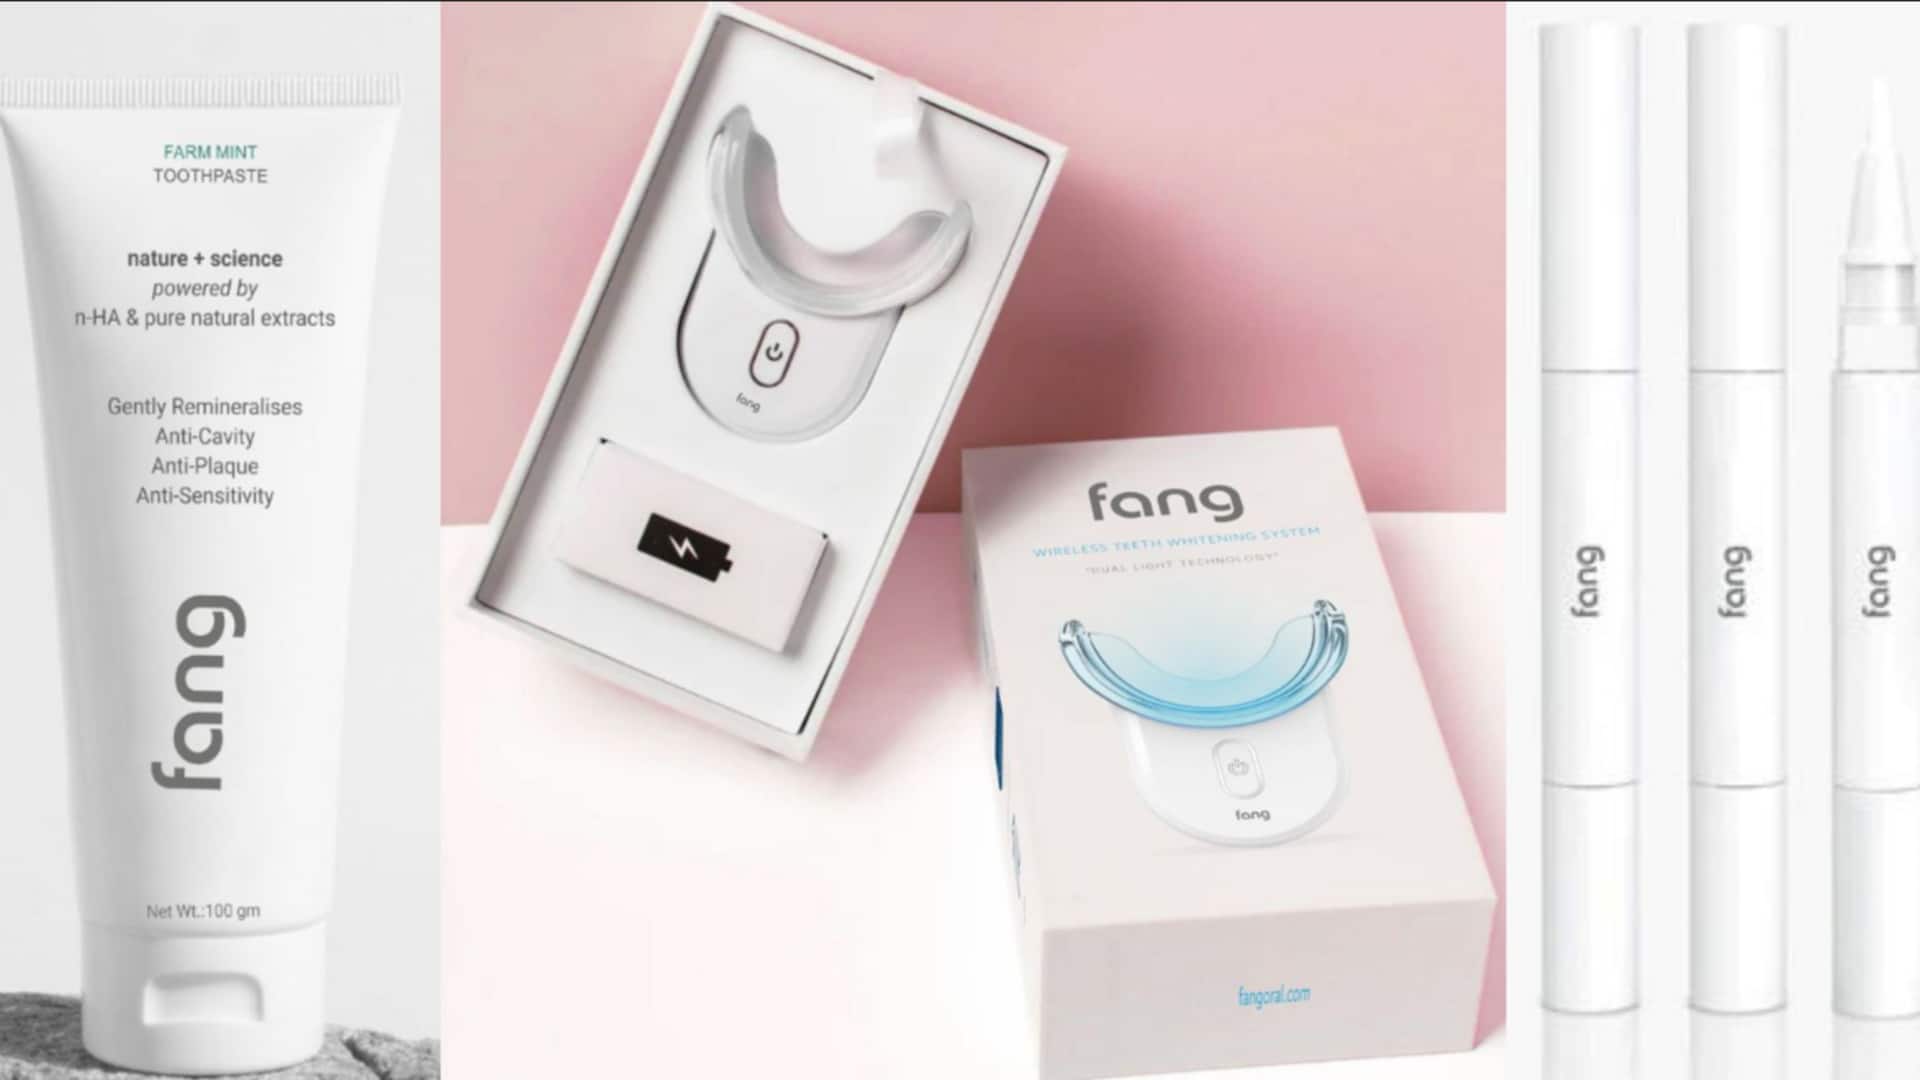 Bringing back the gleam: Fang At-Home Teeth Whitening System review